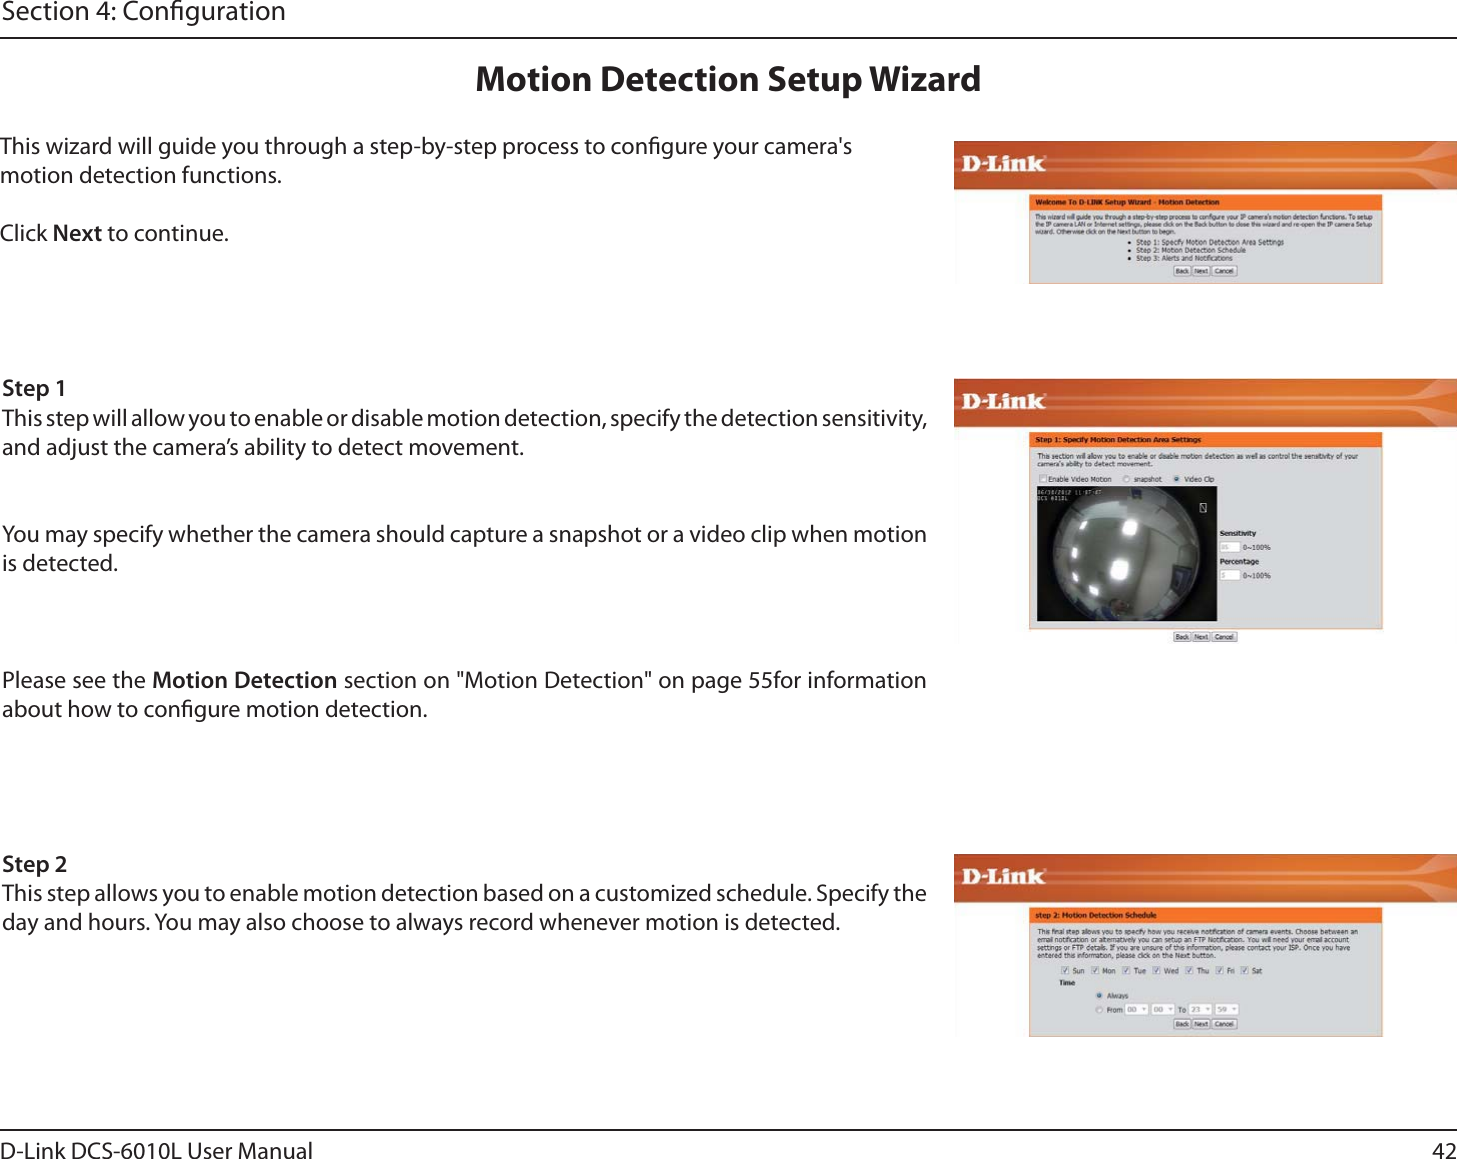 42D-Link DCS-6010L User ManualSection 4: CongurationThis wizard will guide you through a step-by-step process to congure your camera&apos;s motion detection functions.Click Next to continue.Motion Detection Setup WizardStep 1This step will allow you to enable or disable motion detection, specify the detection sensitivity, and adjust the camera’s ability to detect movement.You may specify whether the camera should capture a snapshot or a video clip when motion is detected.Please see the Motion Detection section on &quot;Motion Detection&quot; on page 55for information about how to congure motion detection.Step 2This step allows you to enable motion detection based on a customized schedule. Specify the day and hours. You may also choose to always record whenever motion is detected.